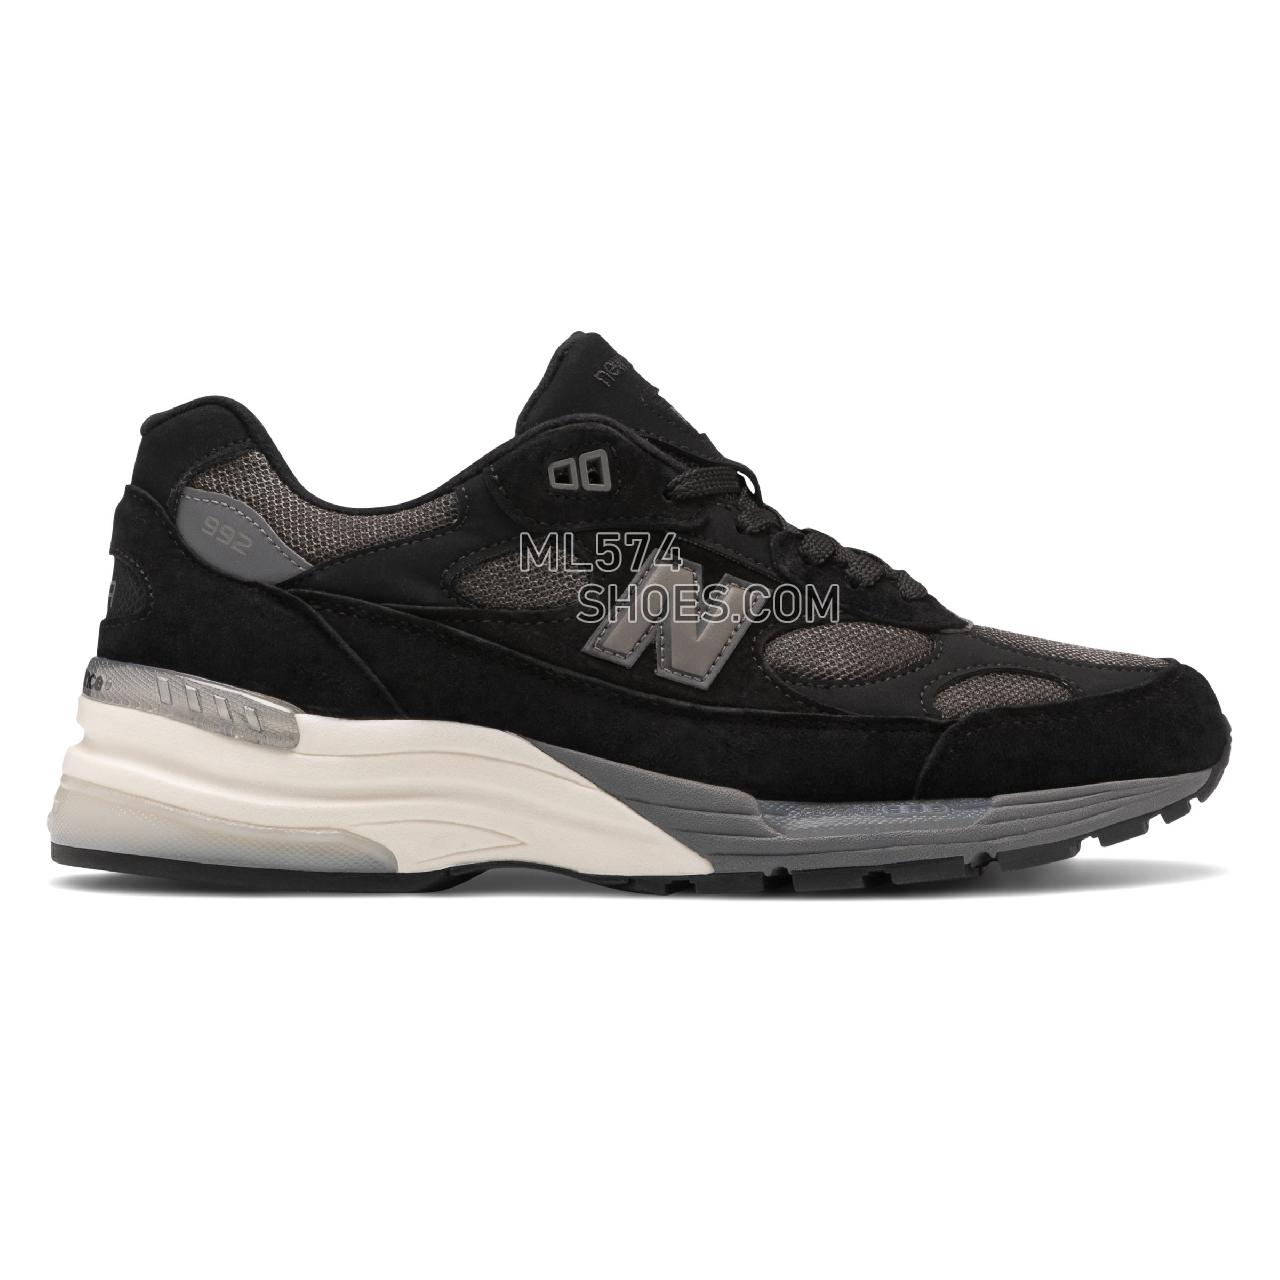 New Balance Made in US 992 - Men's Made in US 992 Classic - Black with Grey - M992BL